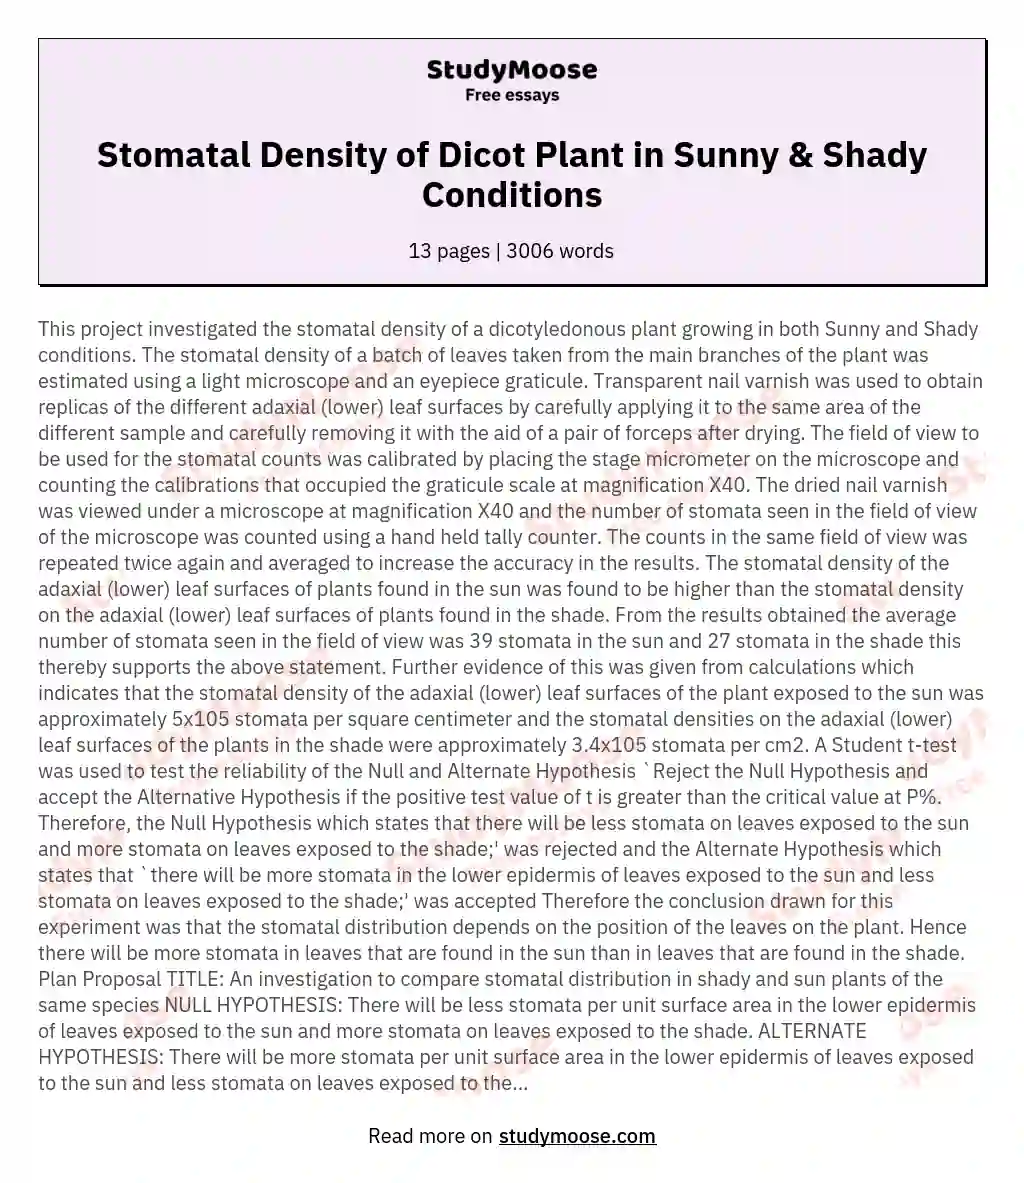 Stomatal Density of Dicot Plant in Sunny & Shady Conditions essay